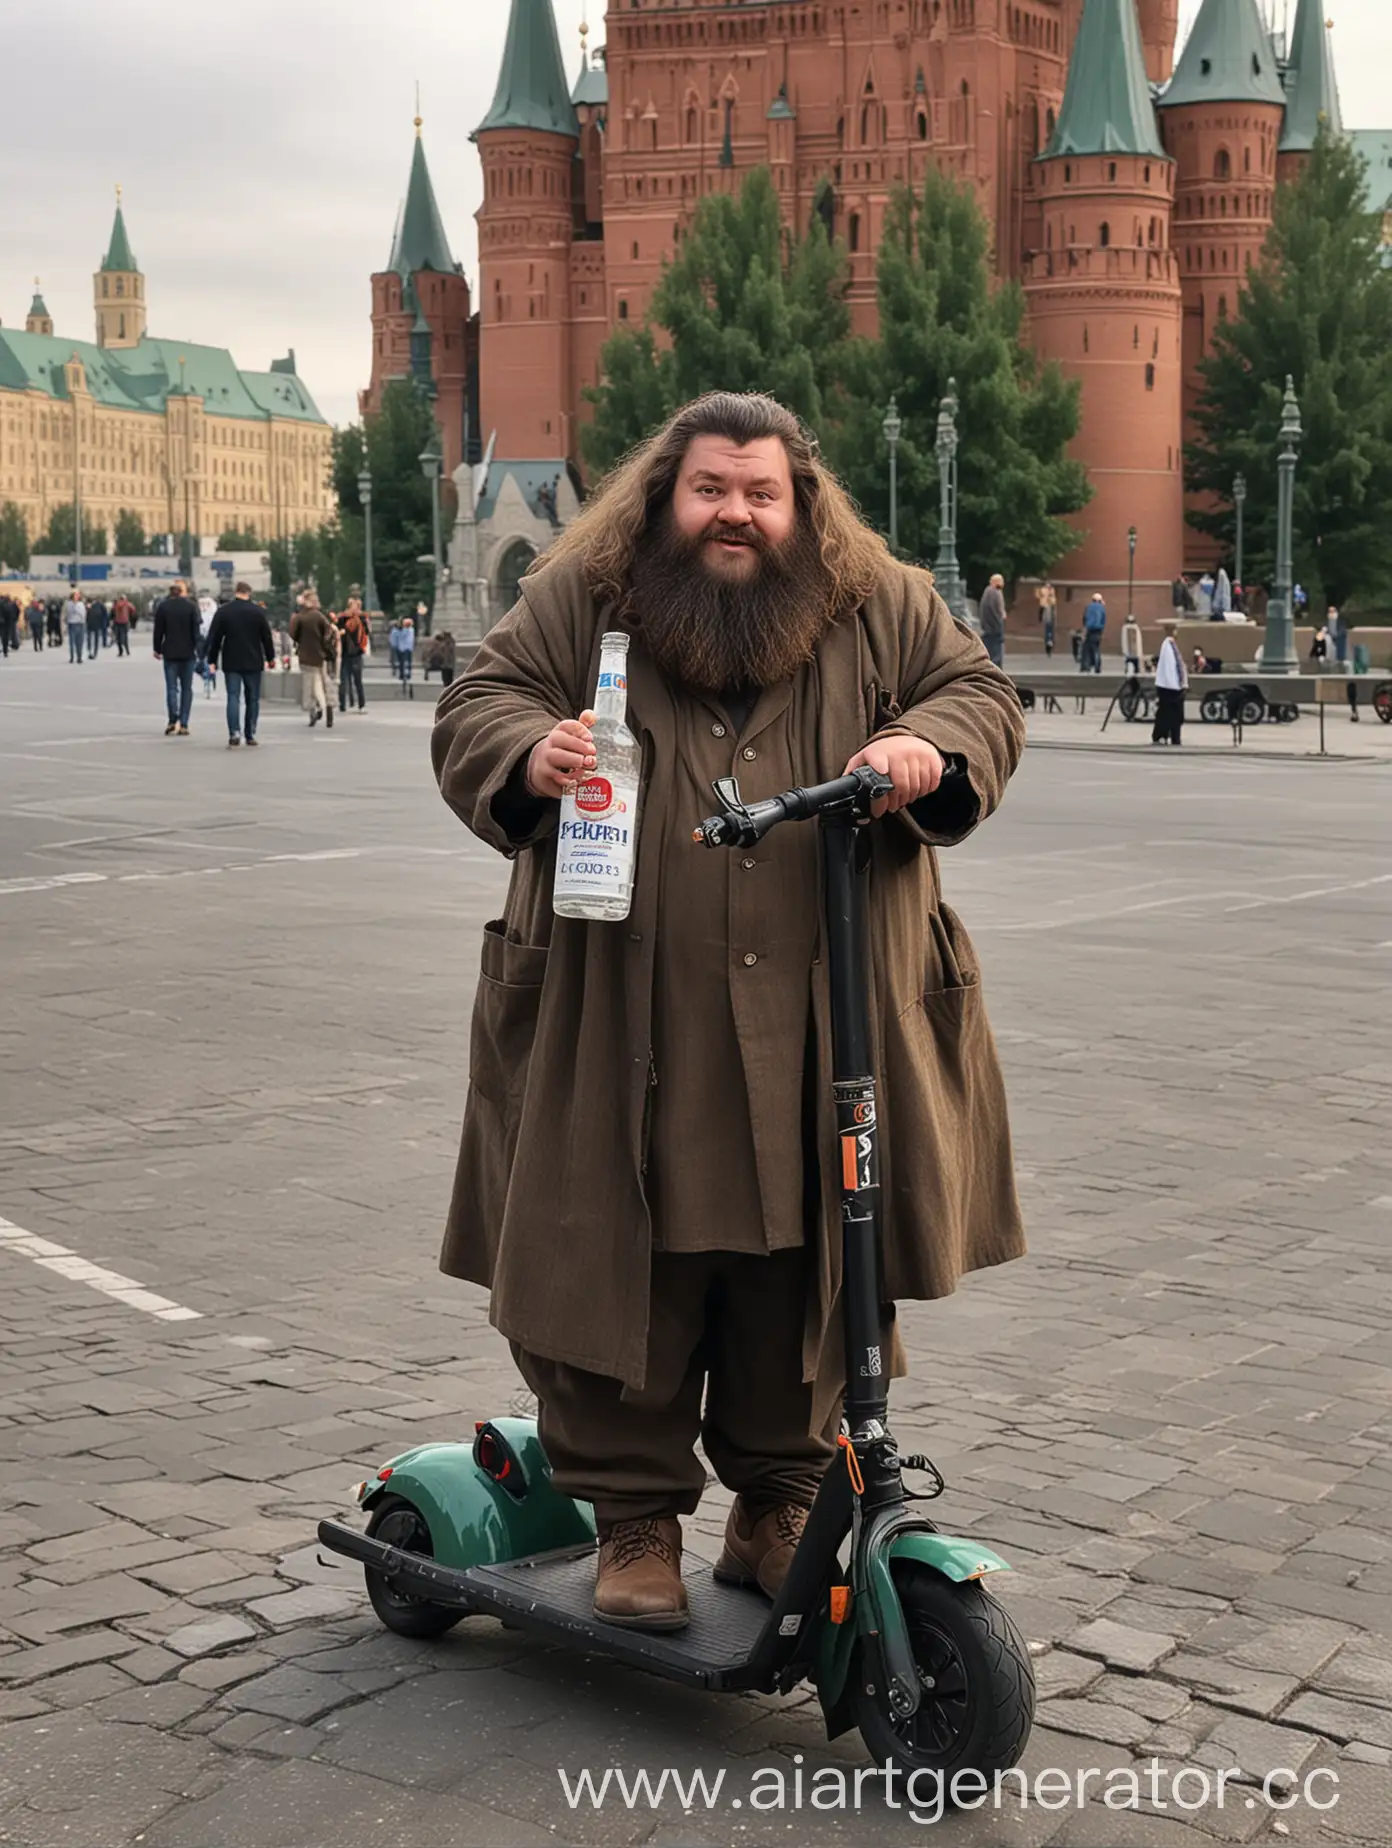 Hagrid-Riding-Electric-Scooter-with-Vodka-Bottle-at-Kremlin